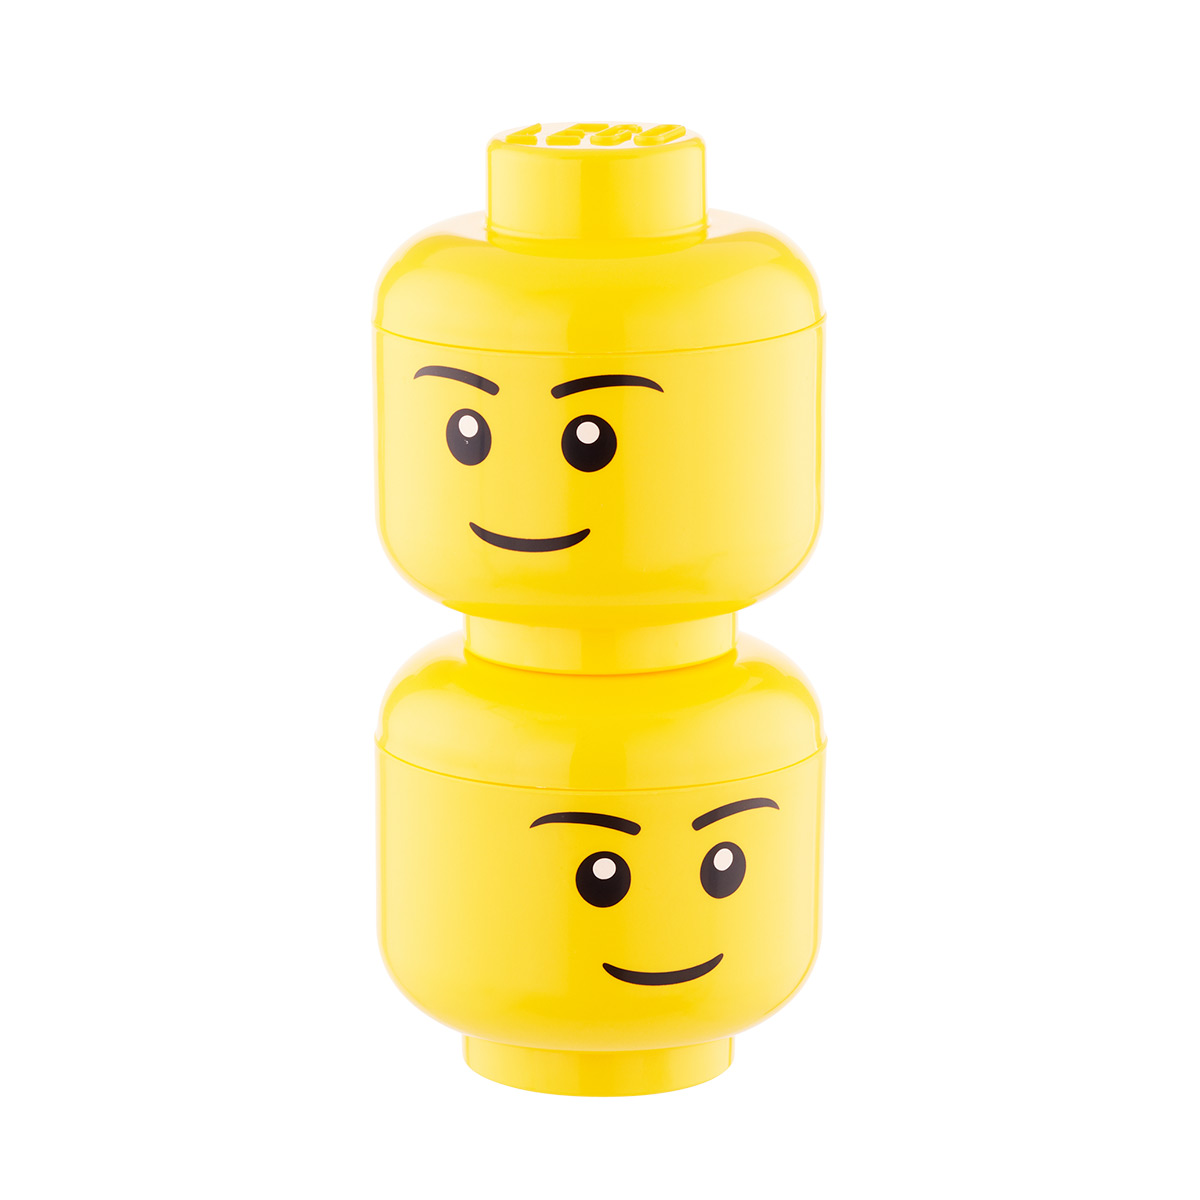 LEGO Heads | The